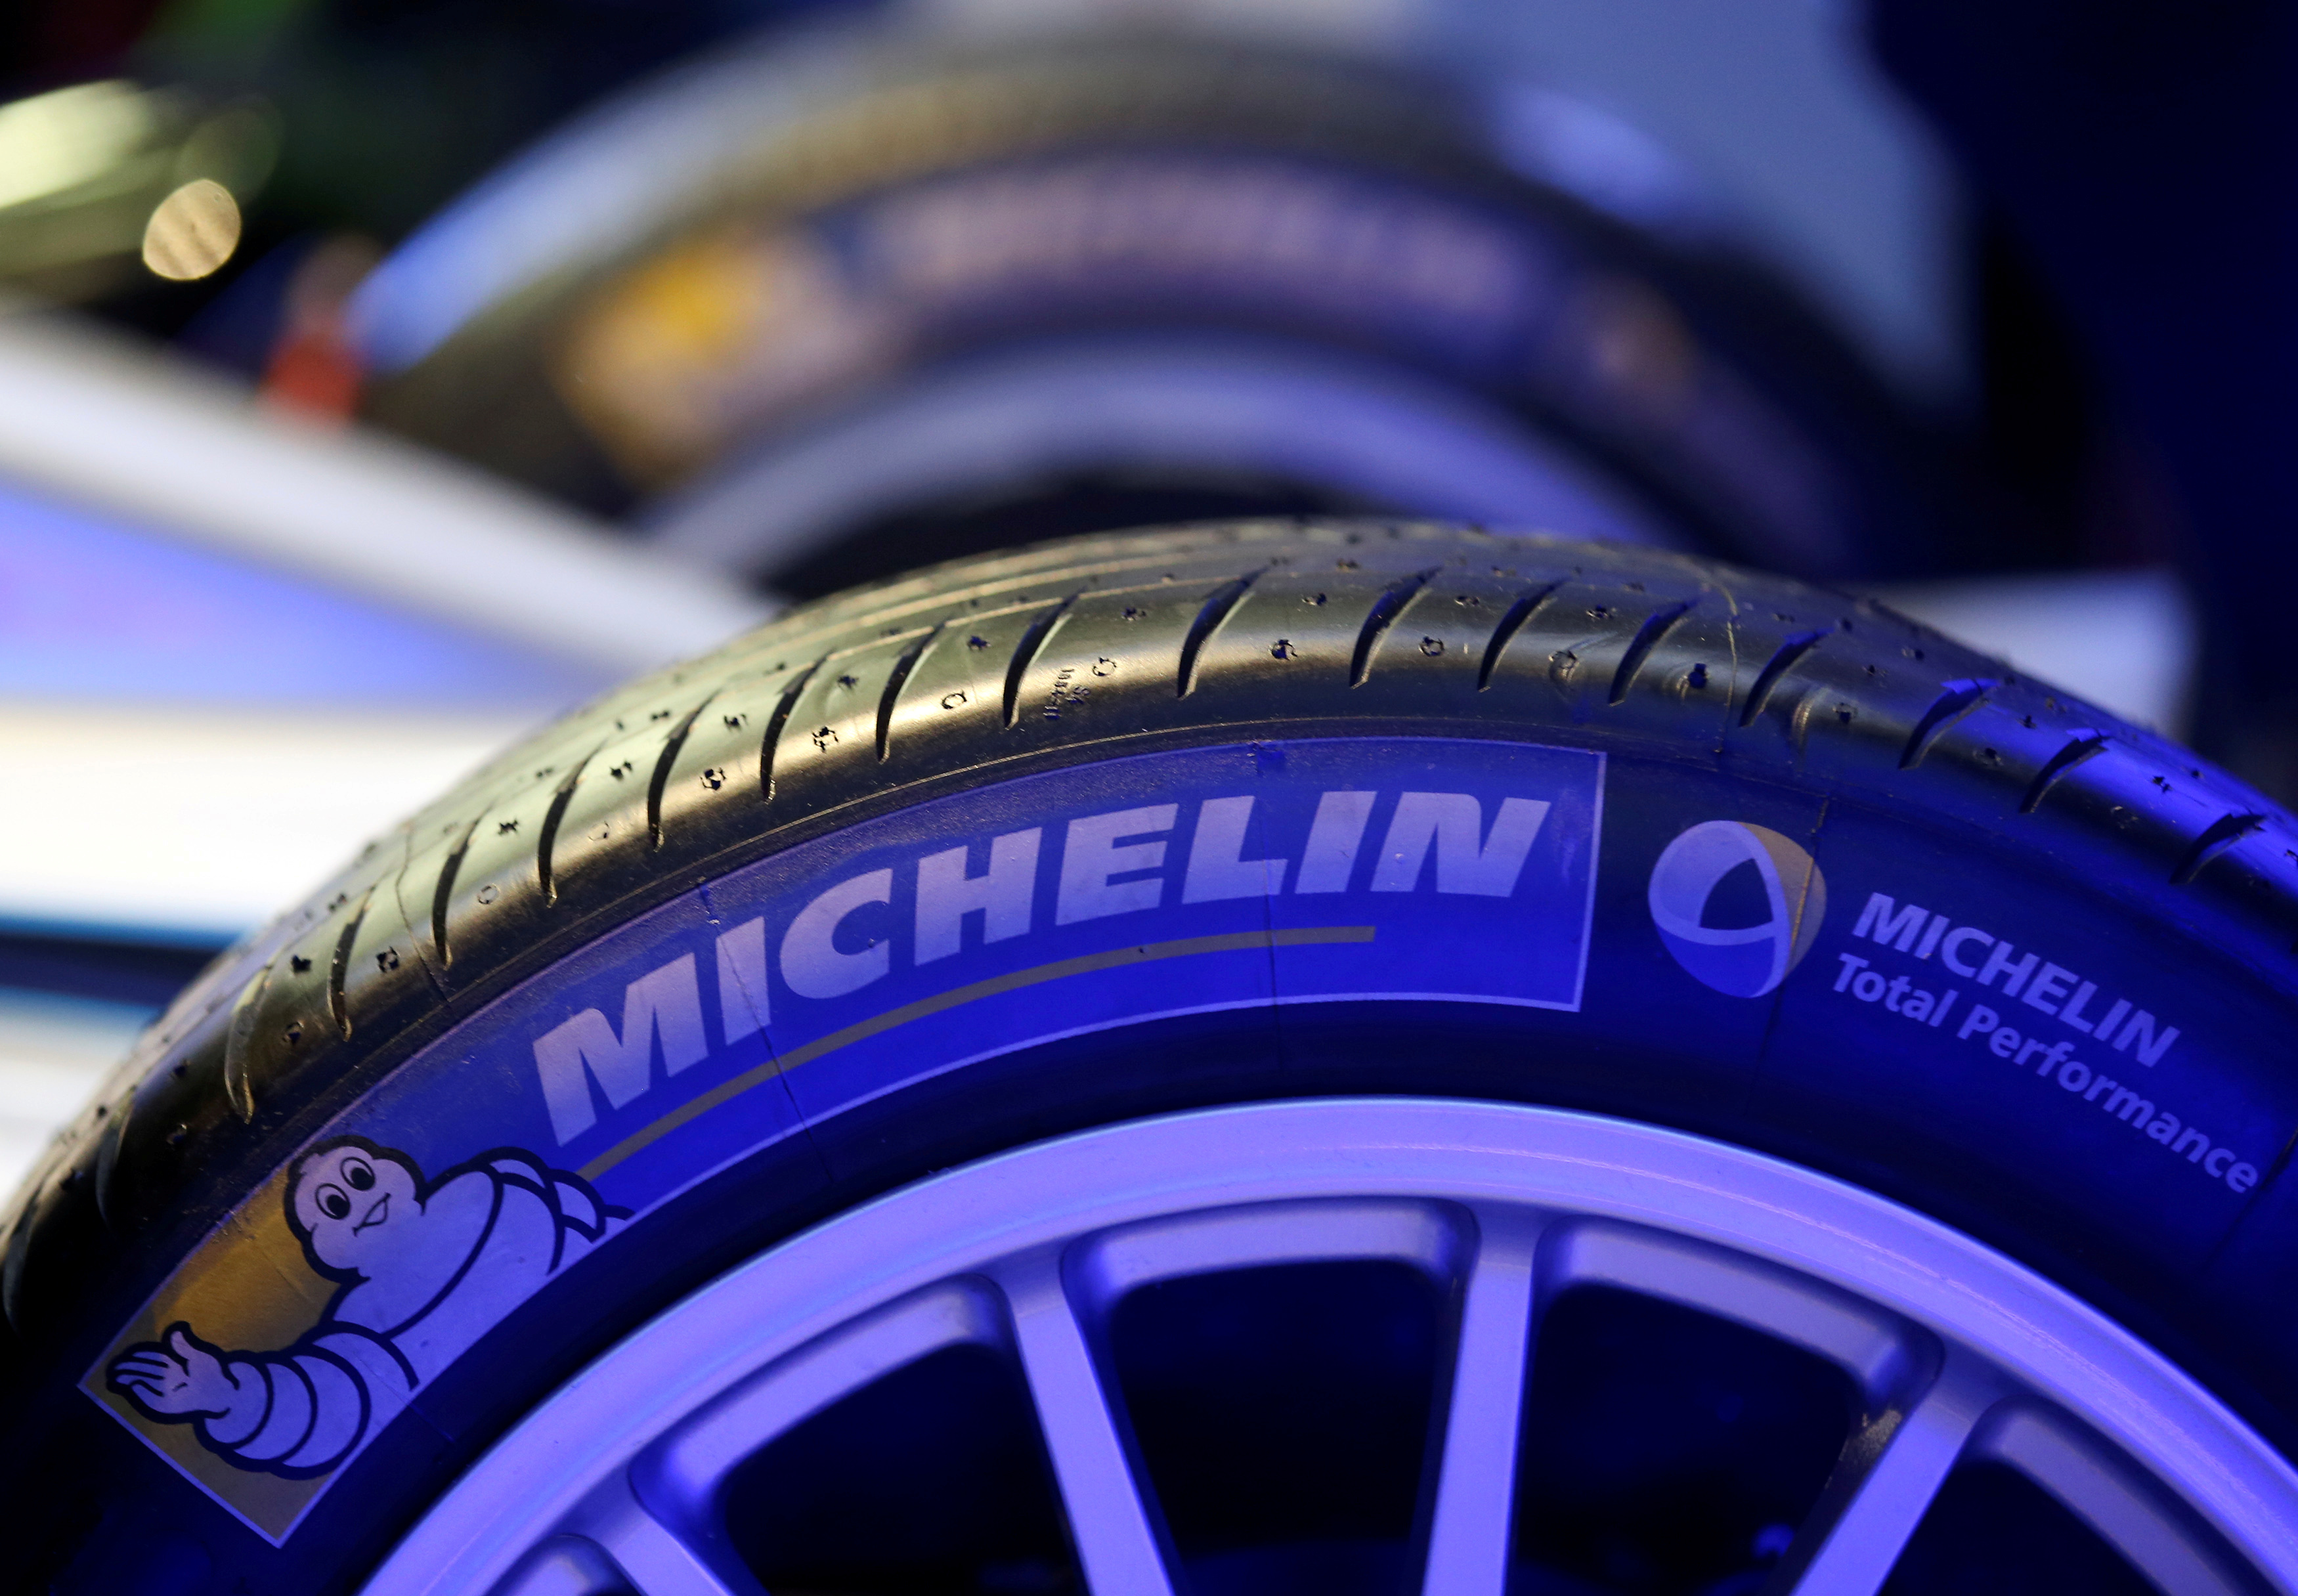 The logo of French tyre maker Michelin on a Formula E racing car tyre